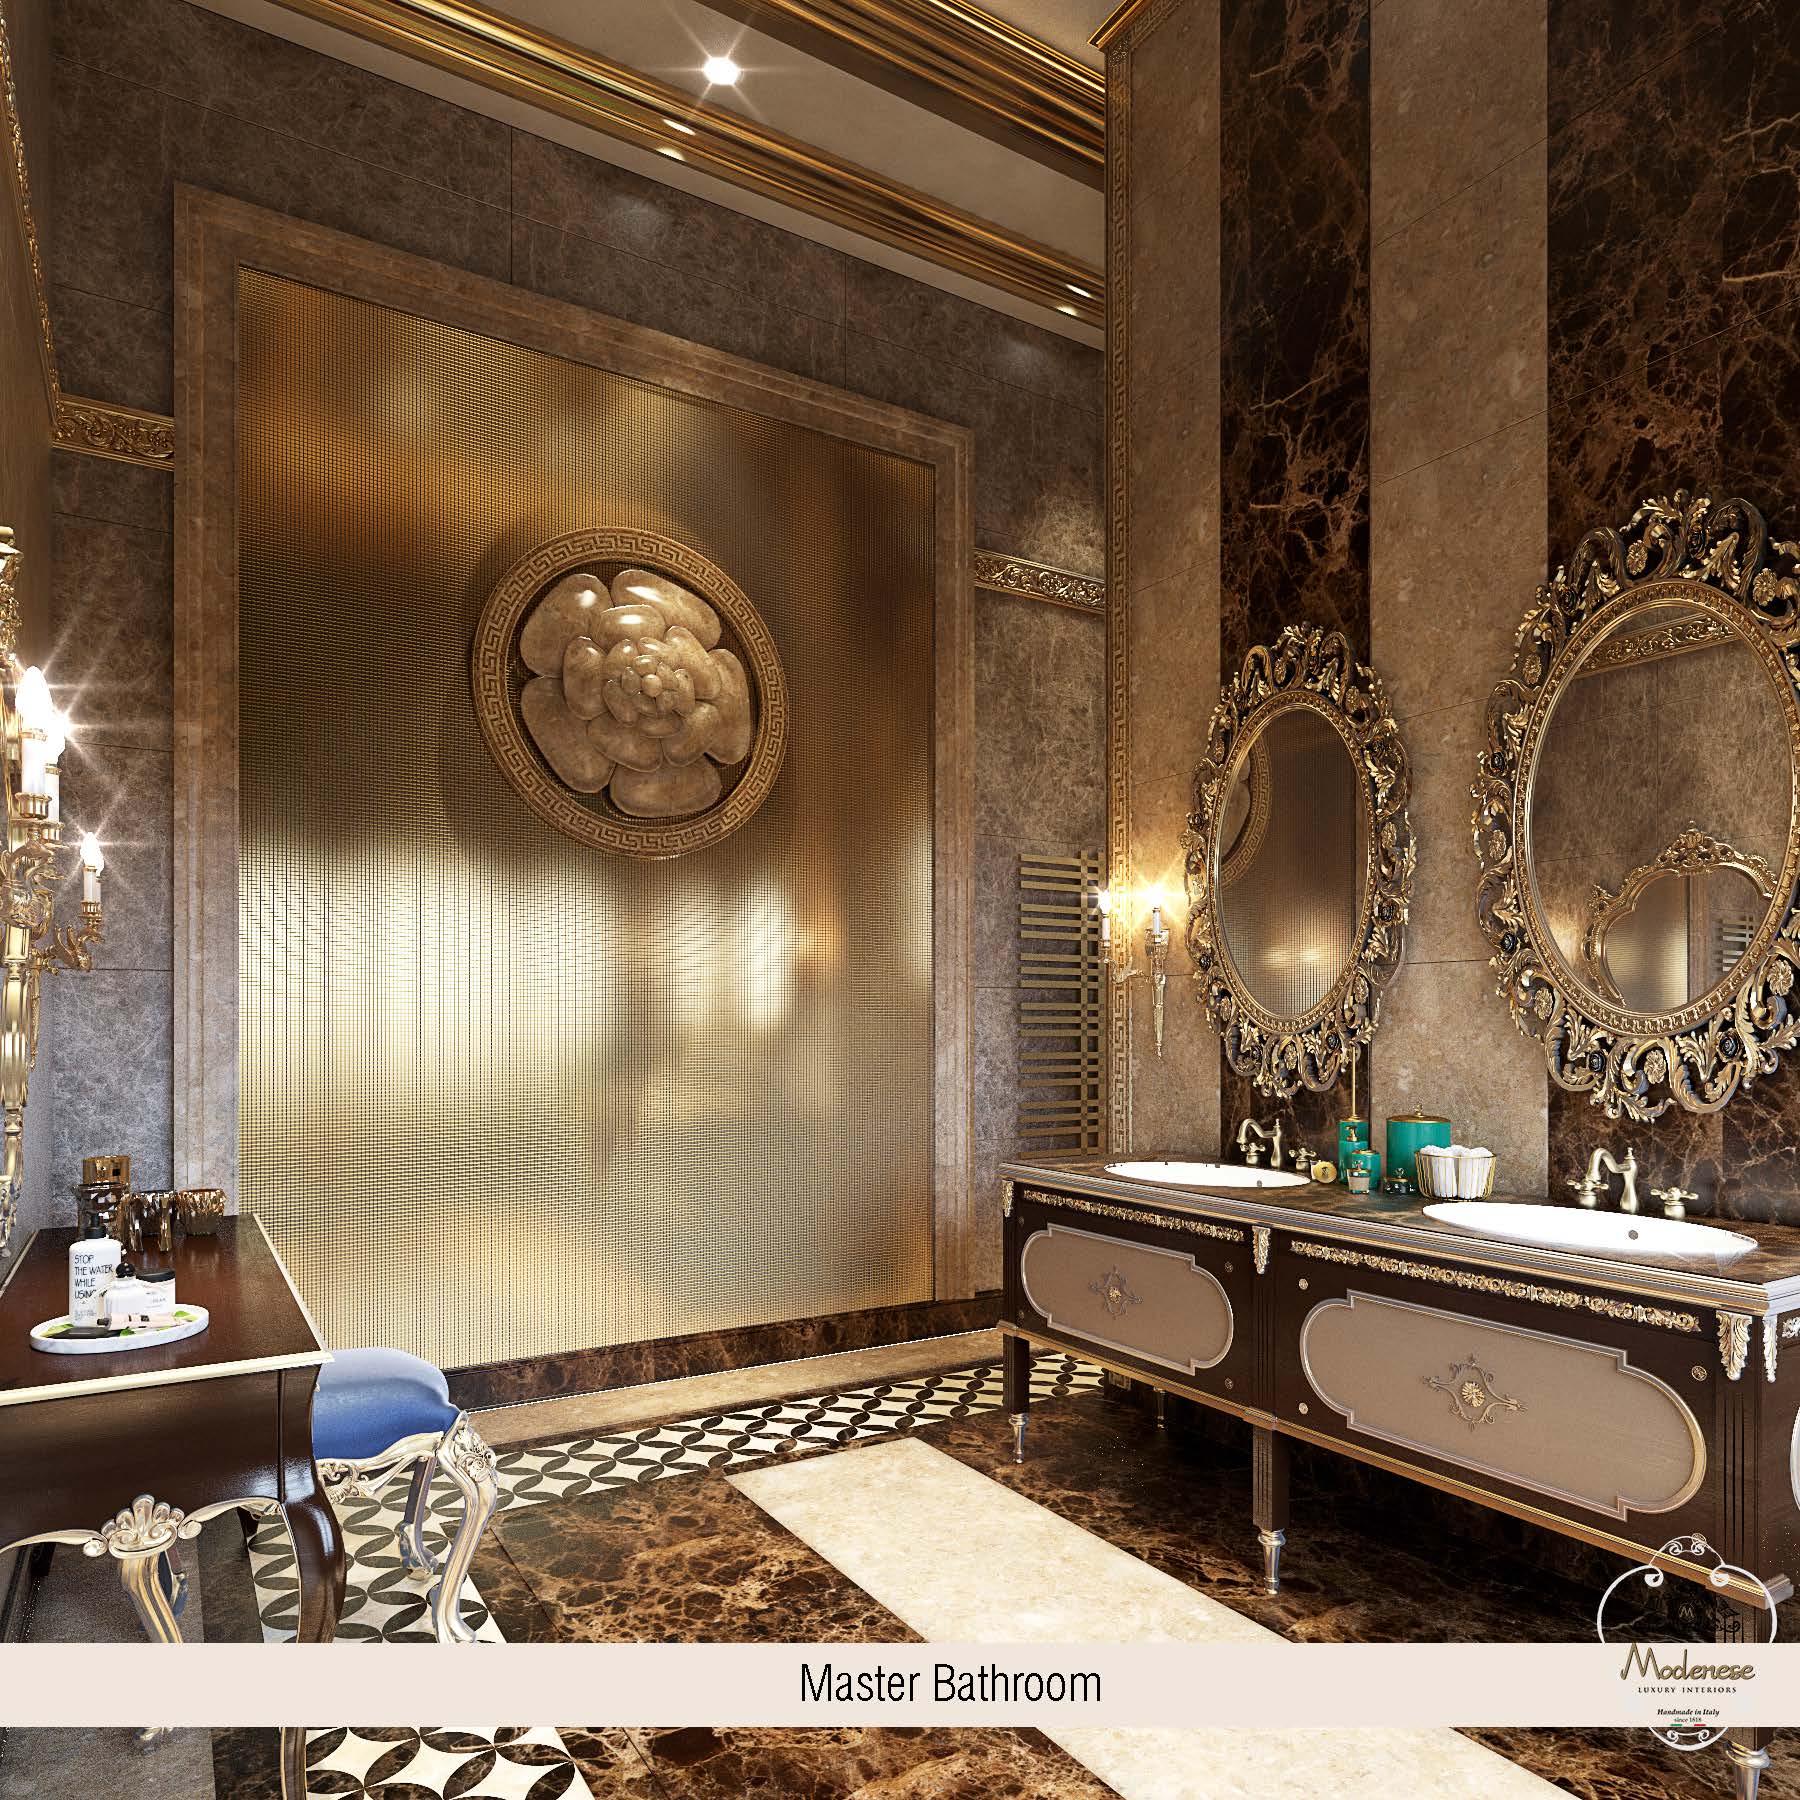 Luxurious interiors, unique design for refined villa interior design. High-end materials and best quality furniture made in Italy. Gorgeous Master Bathroom. Exclusive furniture manufacturing in Italy.